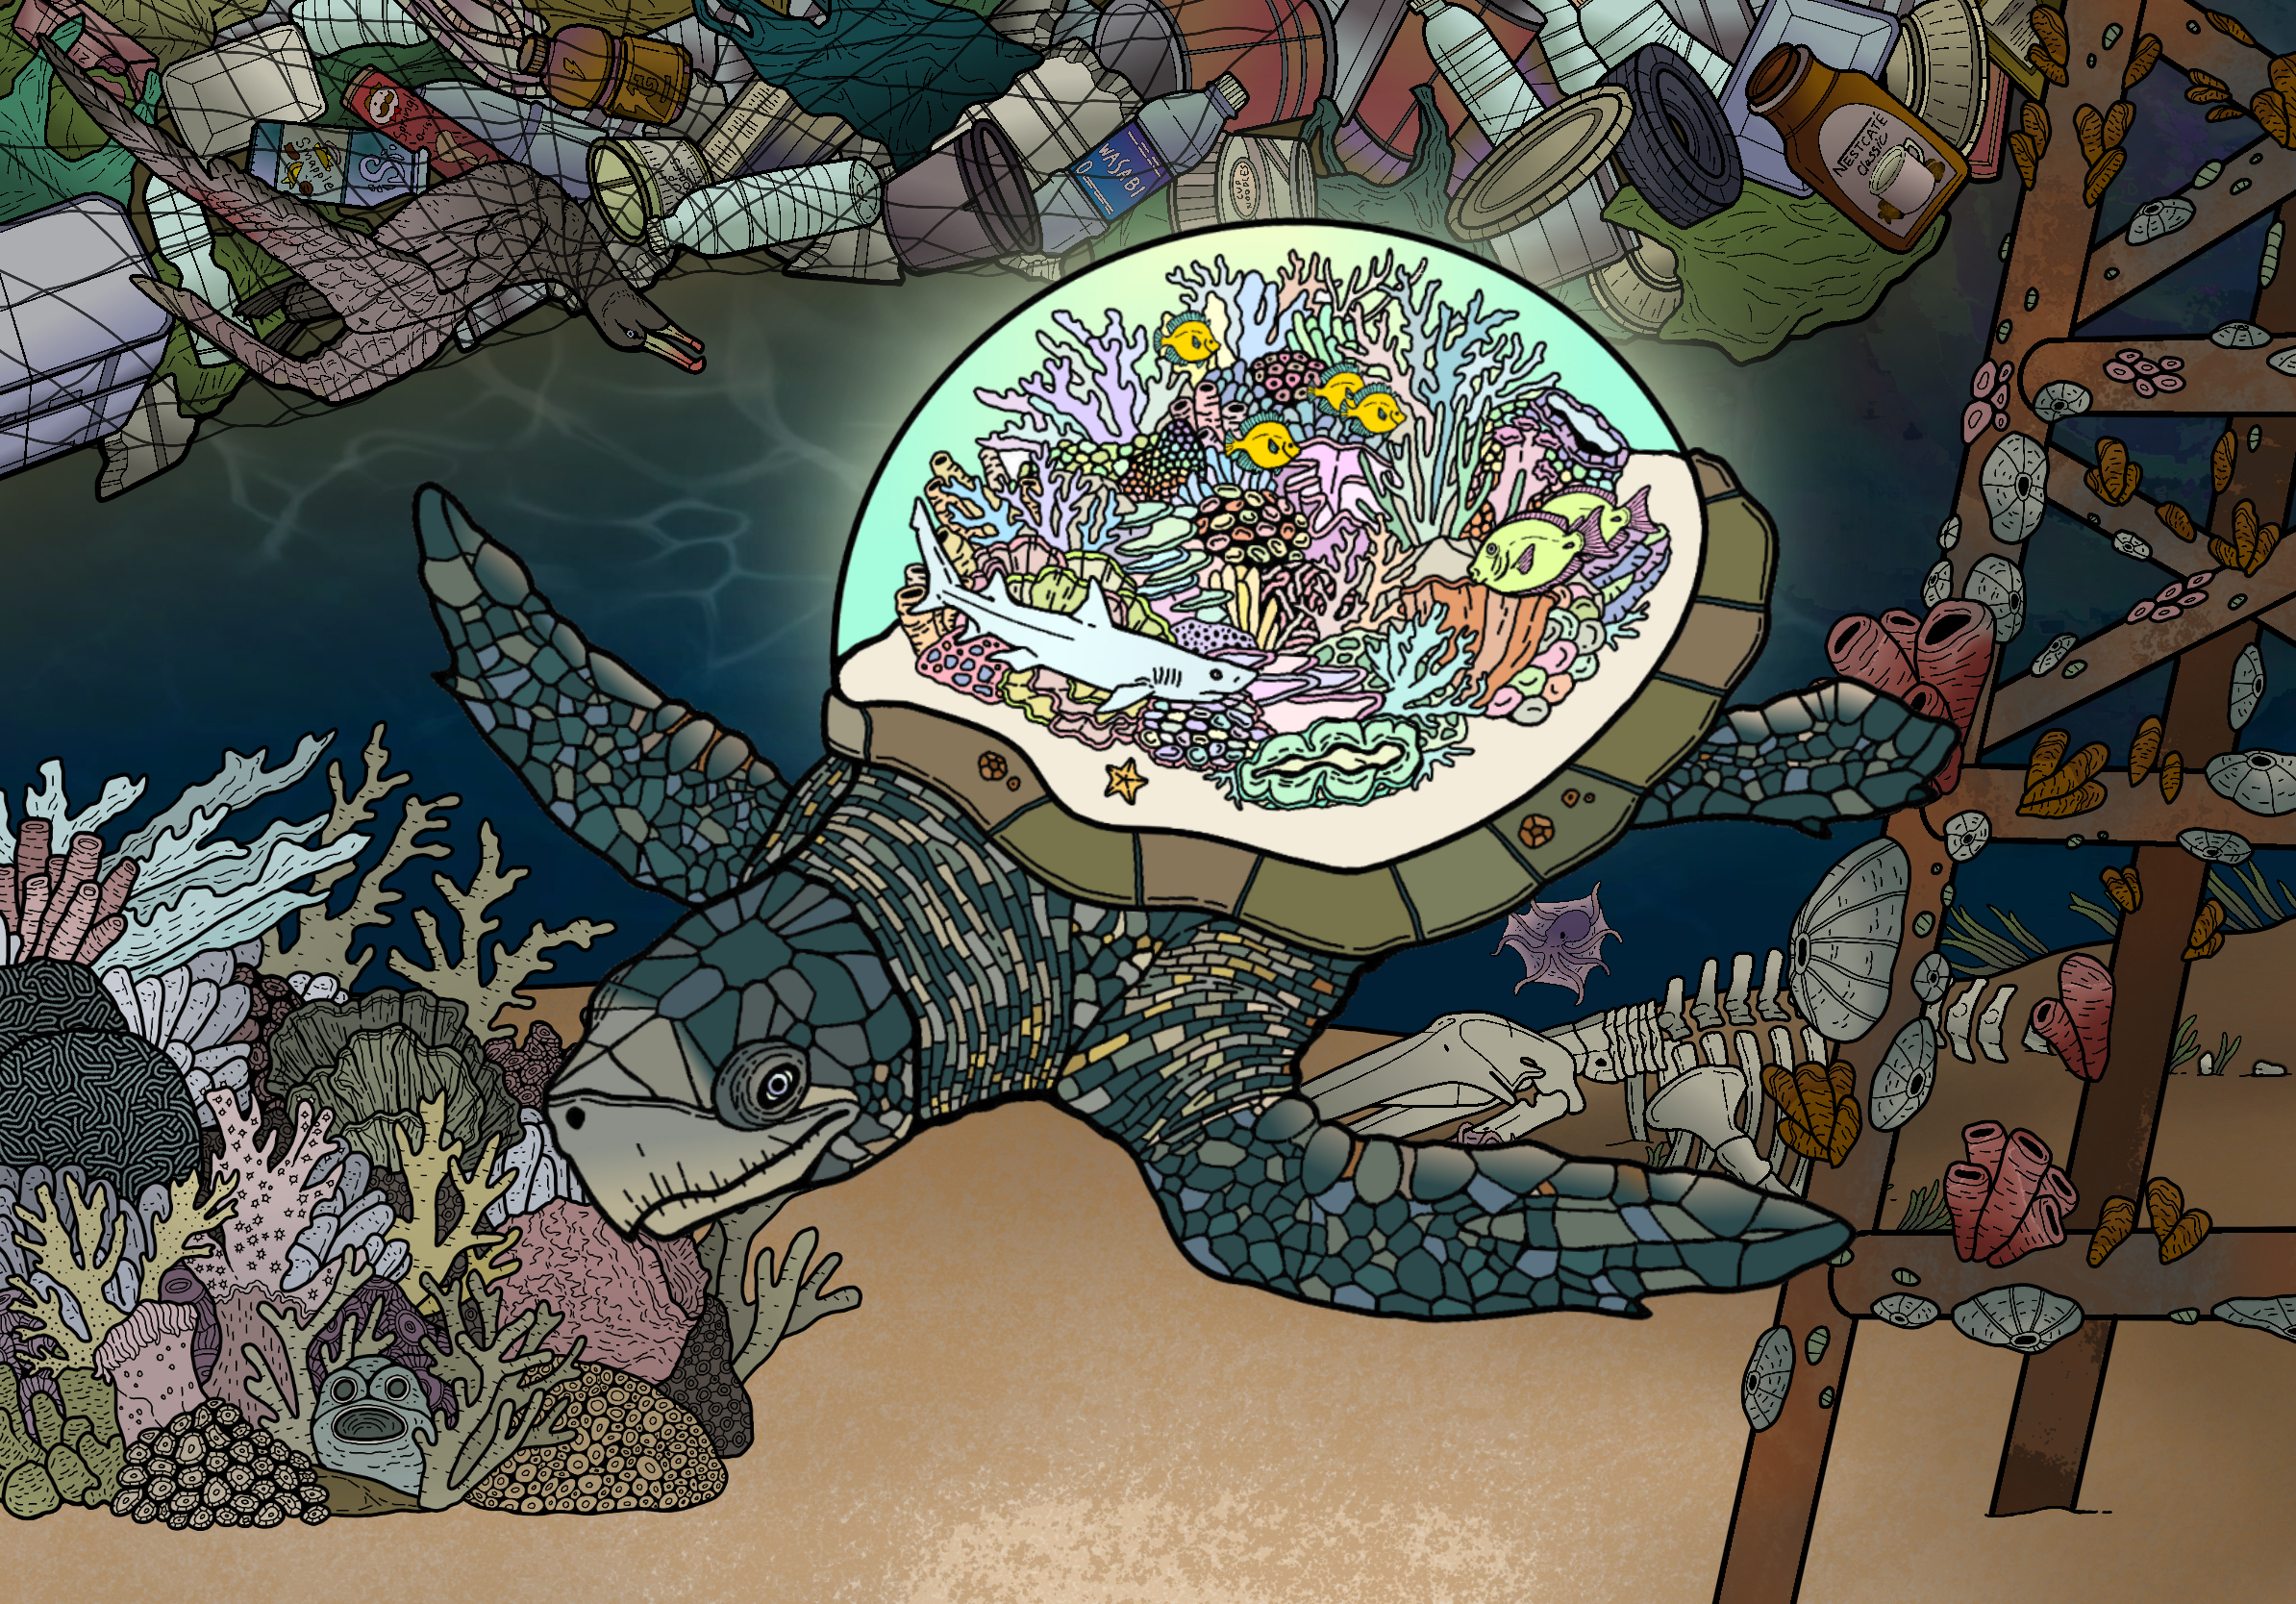 Illustration of a sea turtle underwater. In the background, the ocean shows signs of environmental degradation including plastic debris, a seabird caught in a fishing net, and a whale skeleton. The dome of the turtle's shell contains a scene of a thriving coral reef that glows bright against the otherwise dark illustration.